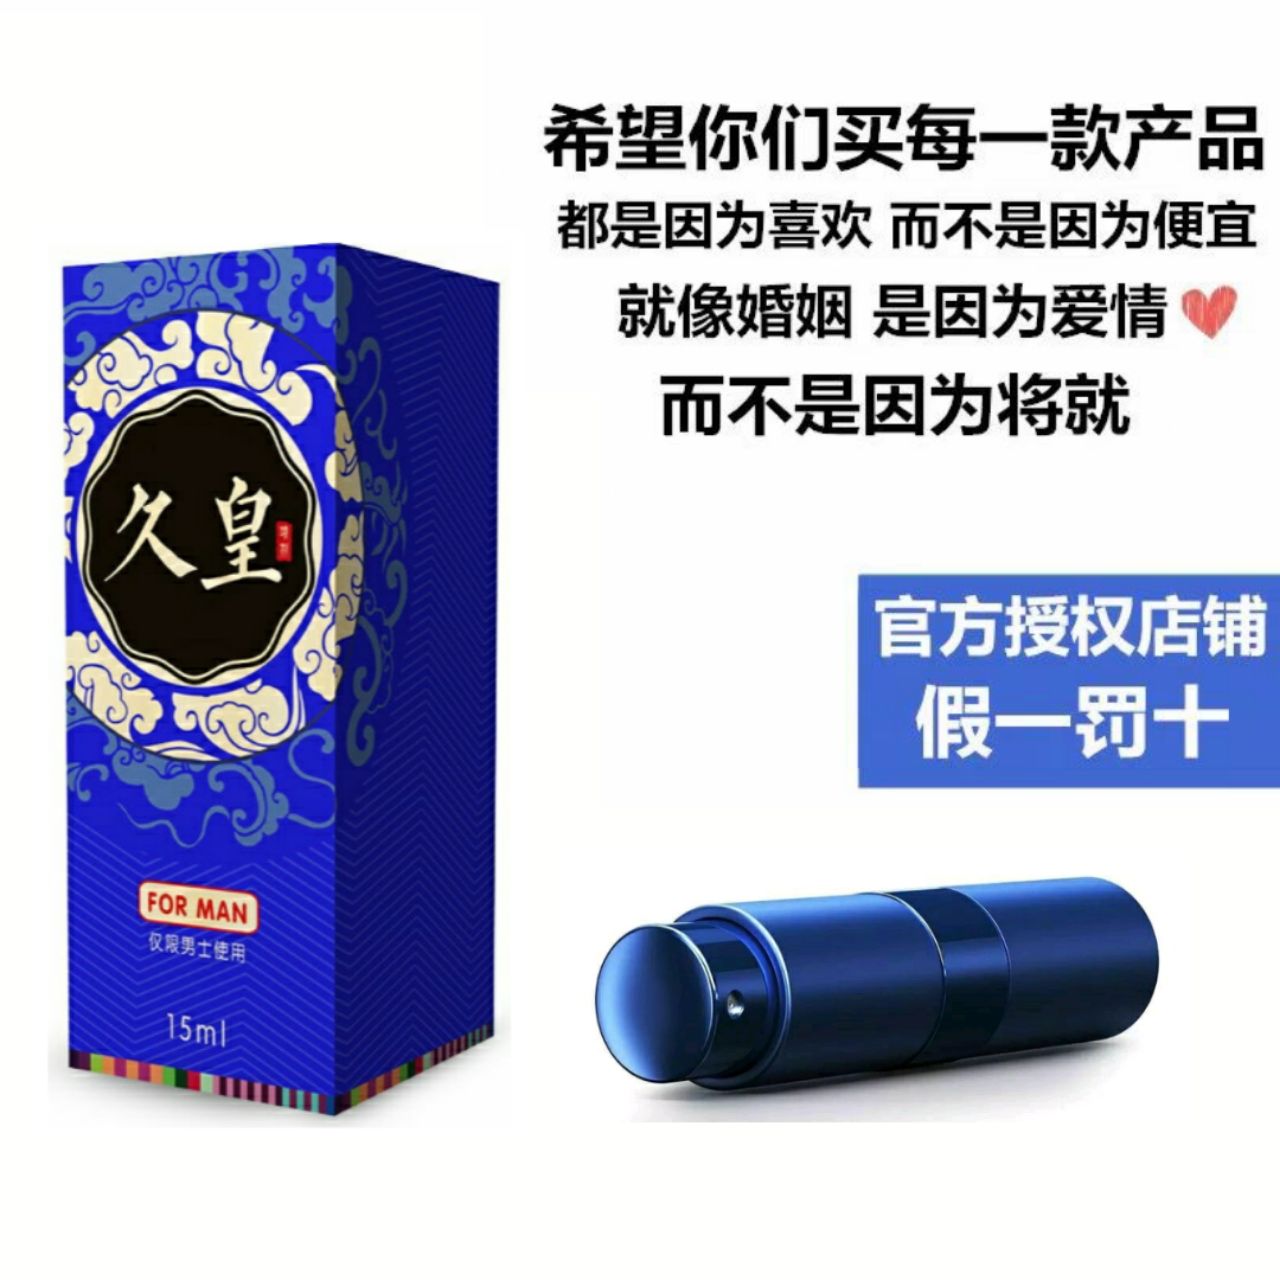 [enhanced] Jiuhuang Delay Spray For Men's Durable War Spray For Adults